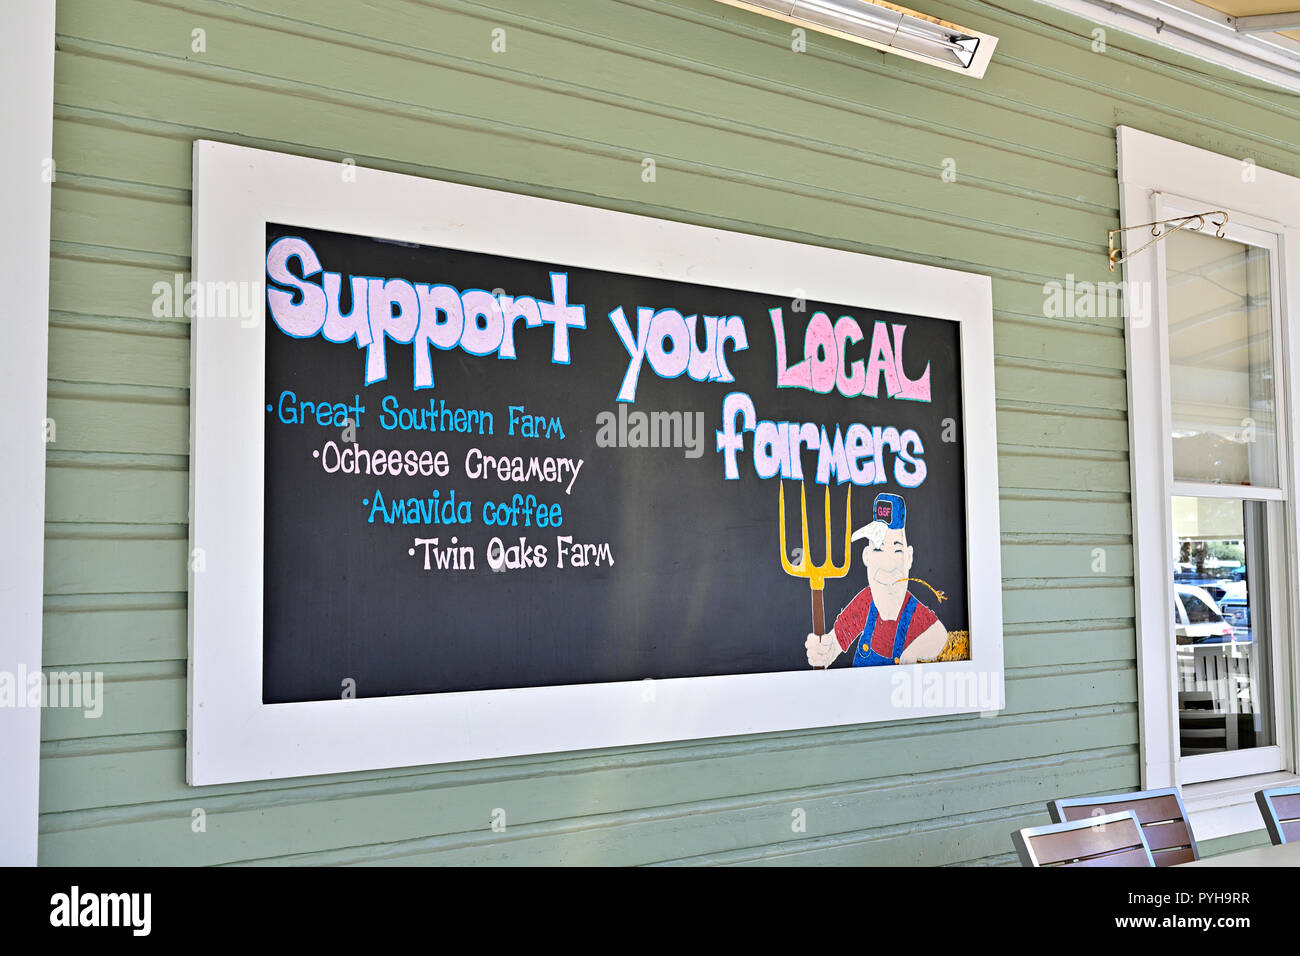 Support your local farmers wall sign promoting local food sources in Seaside Florida, USA. Stock Photo